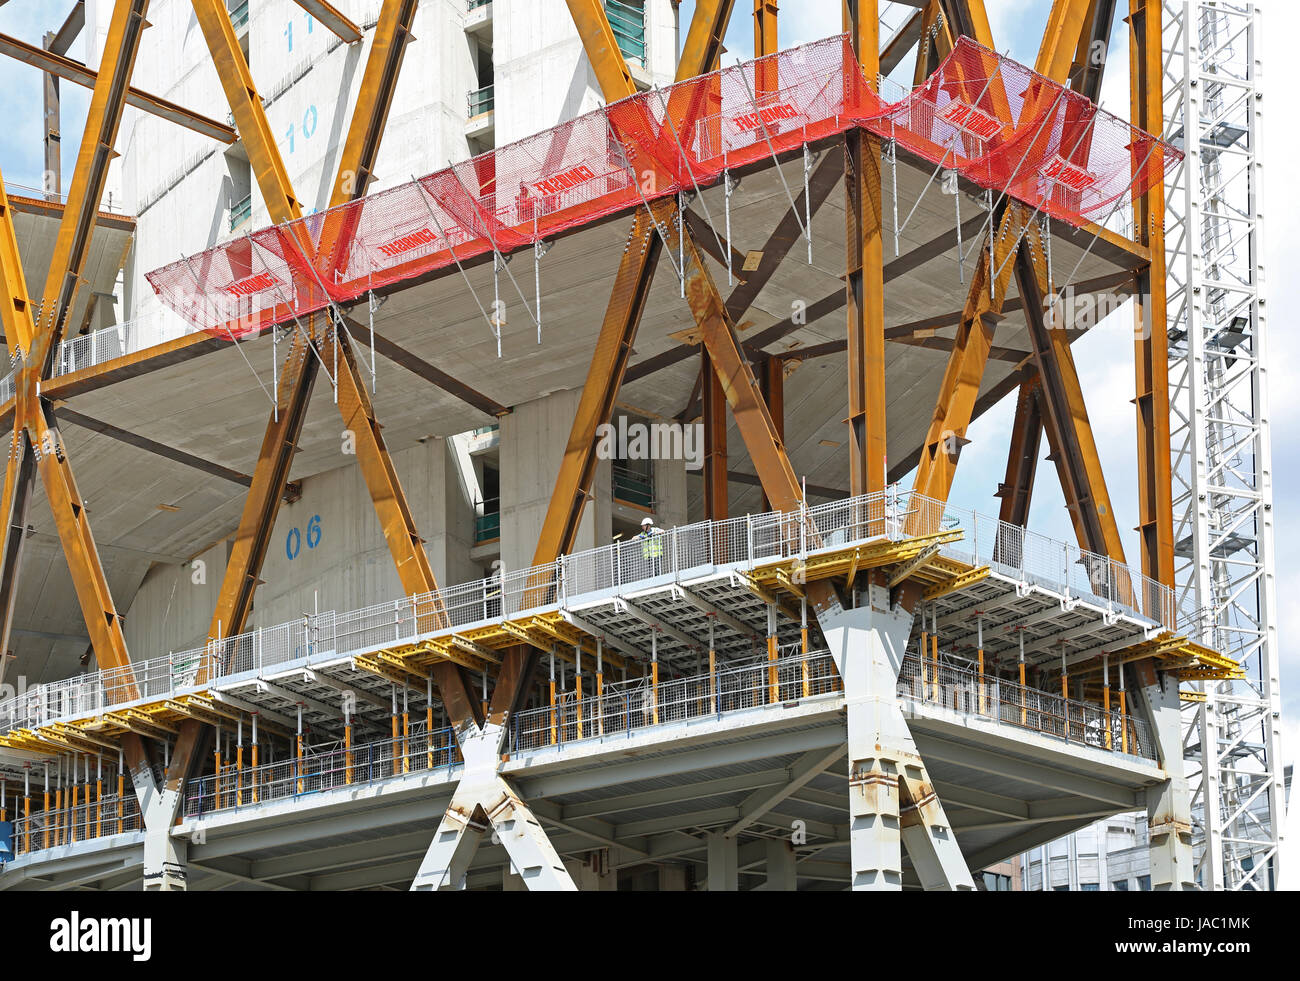 Construction of the Newfoundland building in London's Canary Wharf district. A workman stands on formwork within the diagonal, structural steel frame. Stock Photo